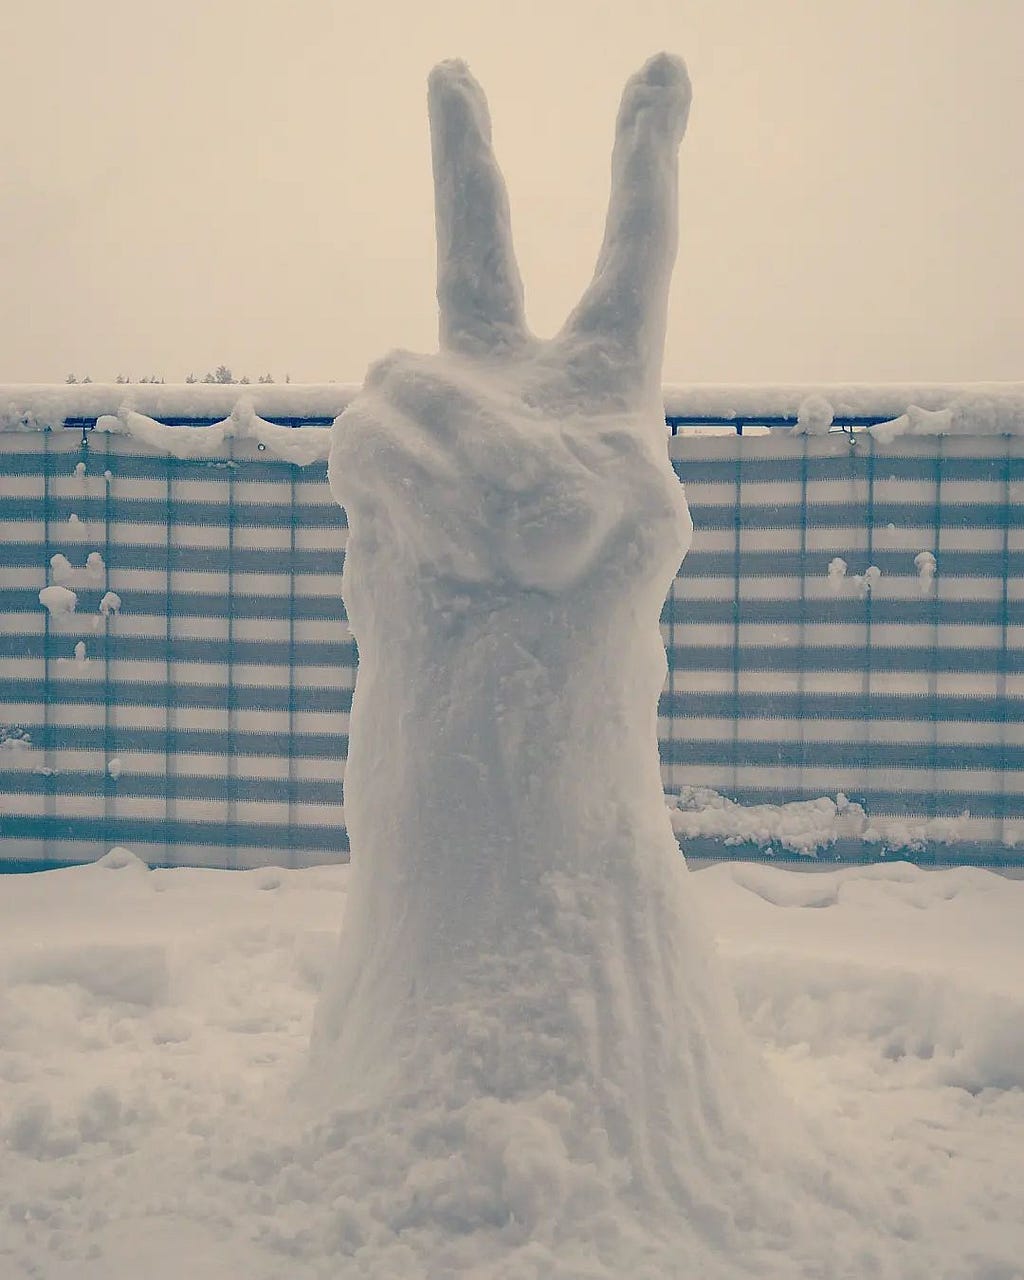 Snow sculpture of a hand making a peace sign